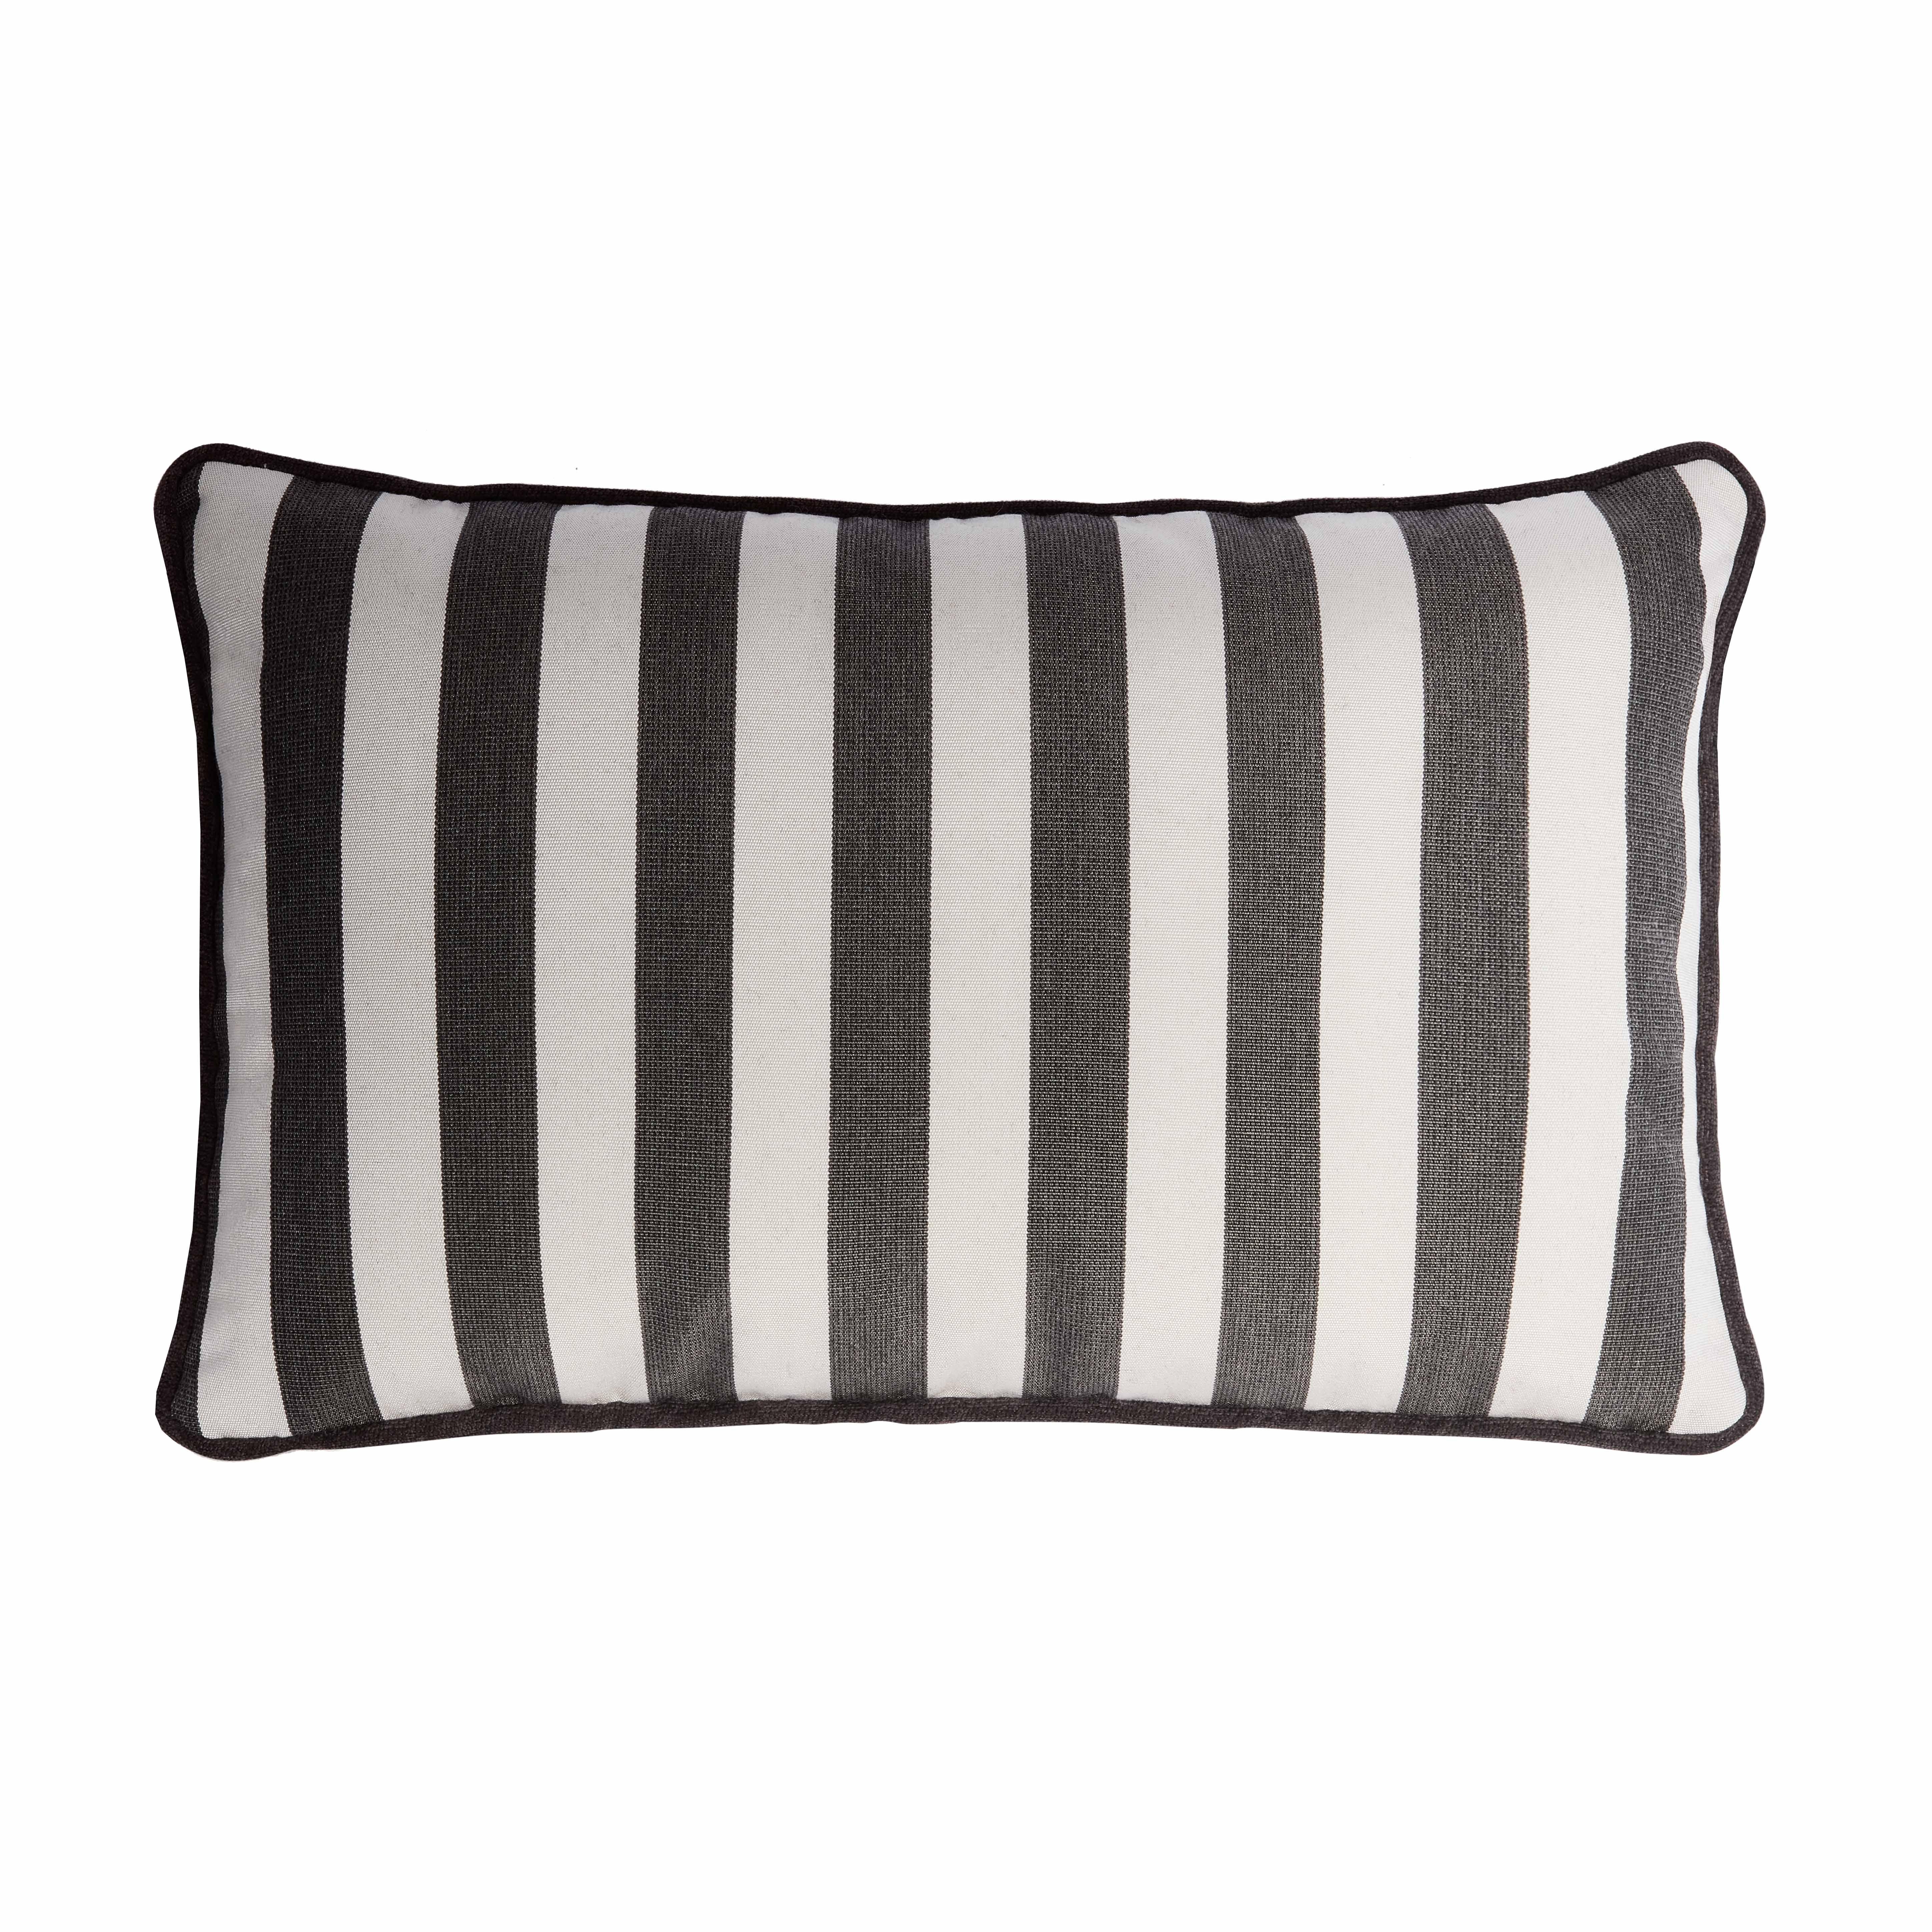 Hand-Crafted Striped Happy Pillow Outdoor with Fringes Beige and White  For Sale